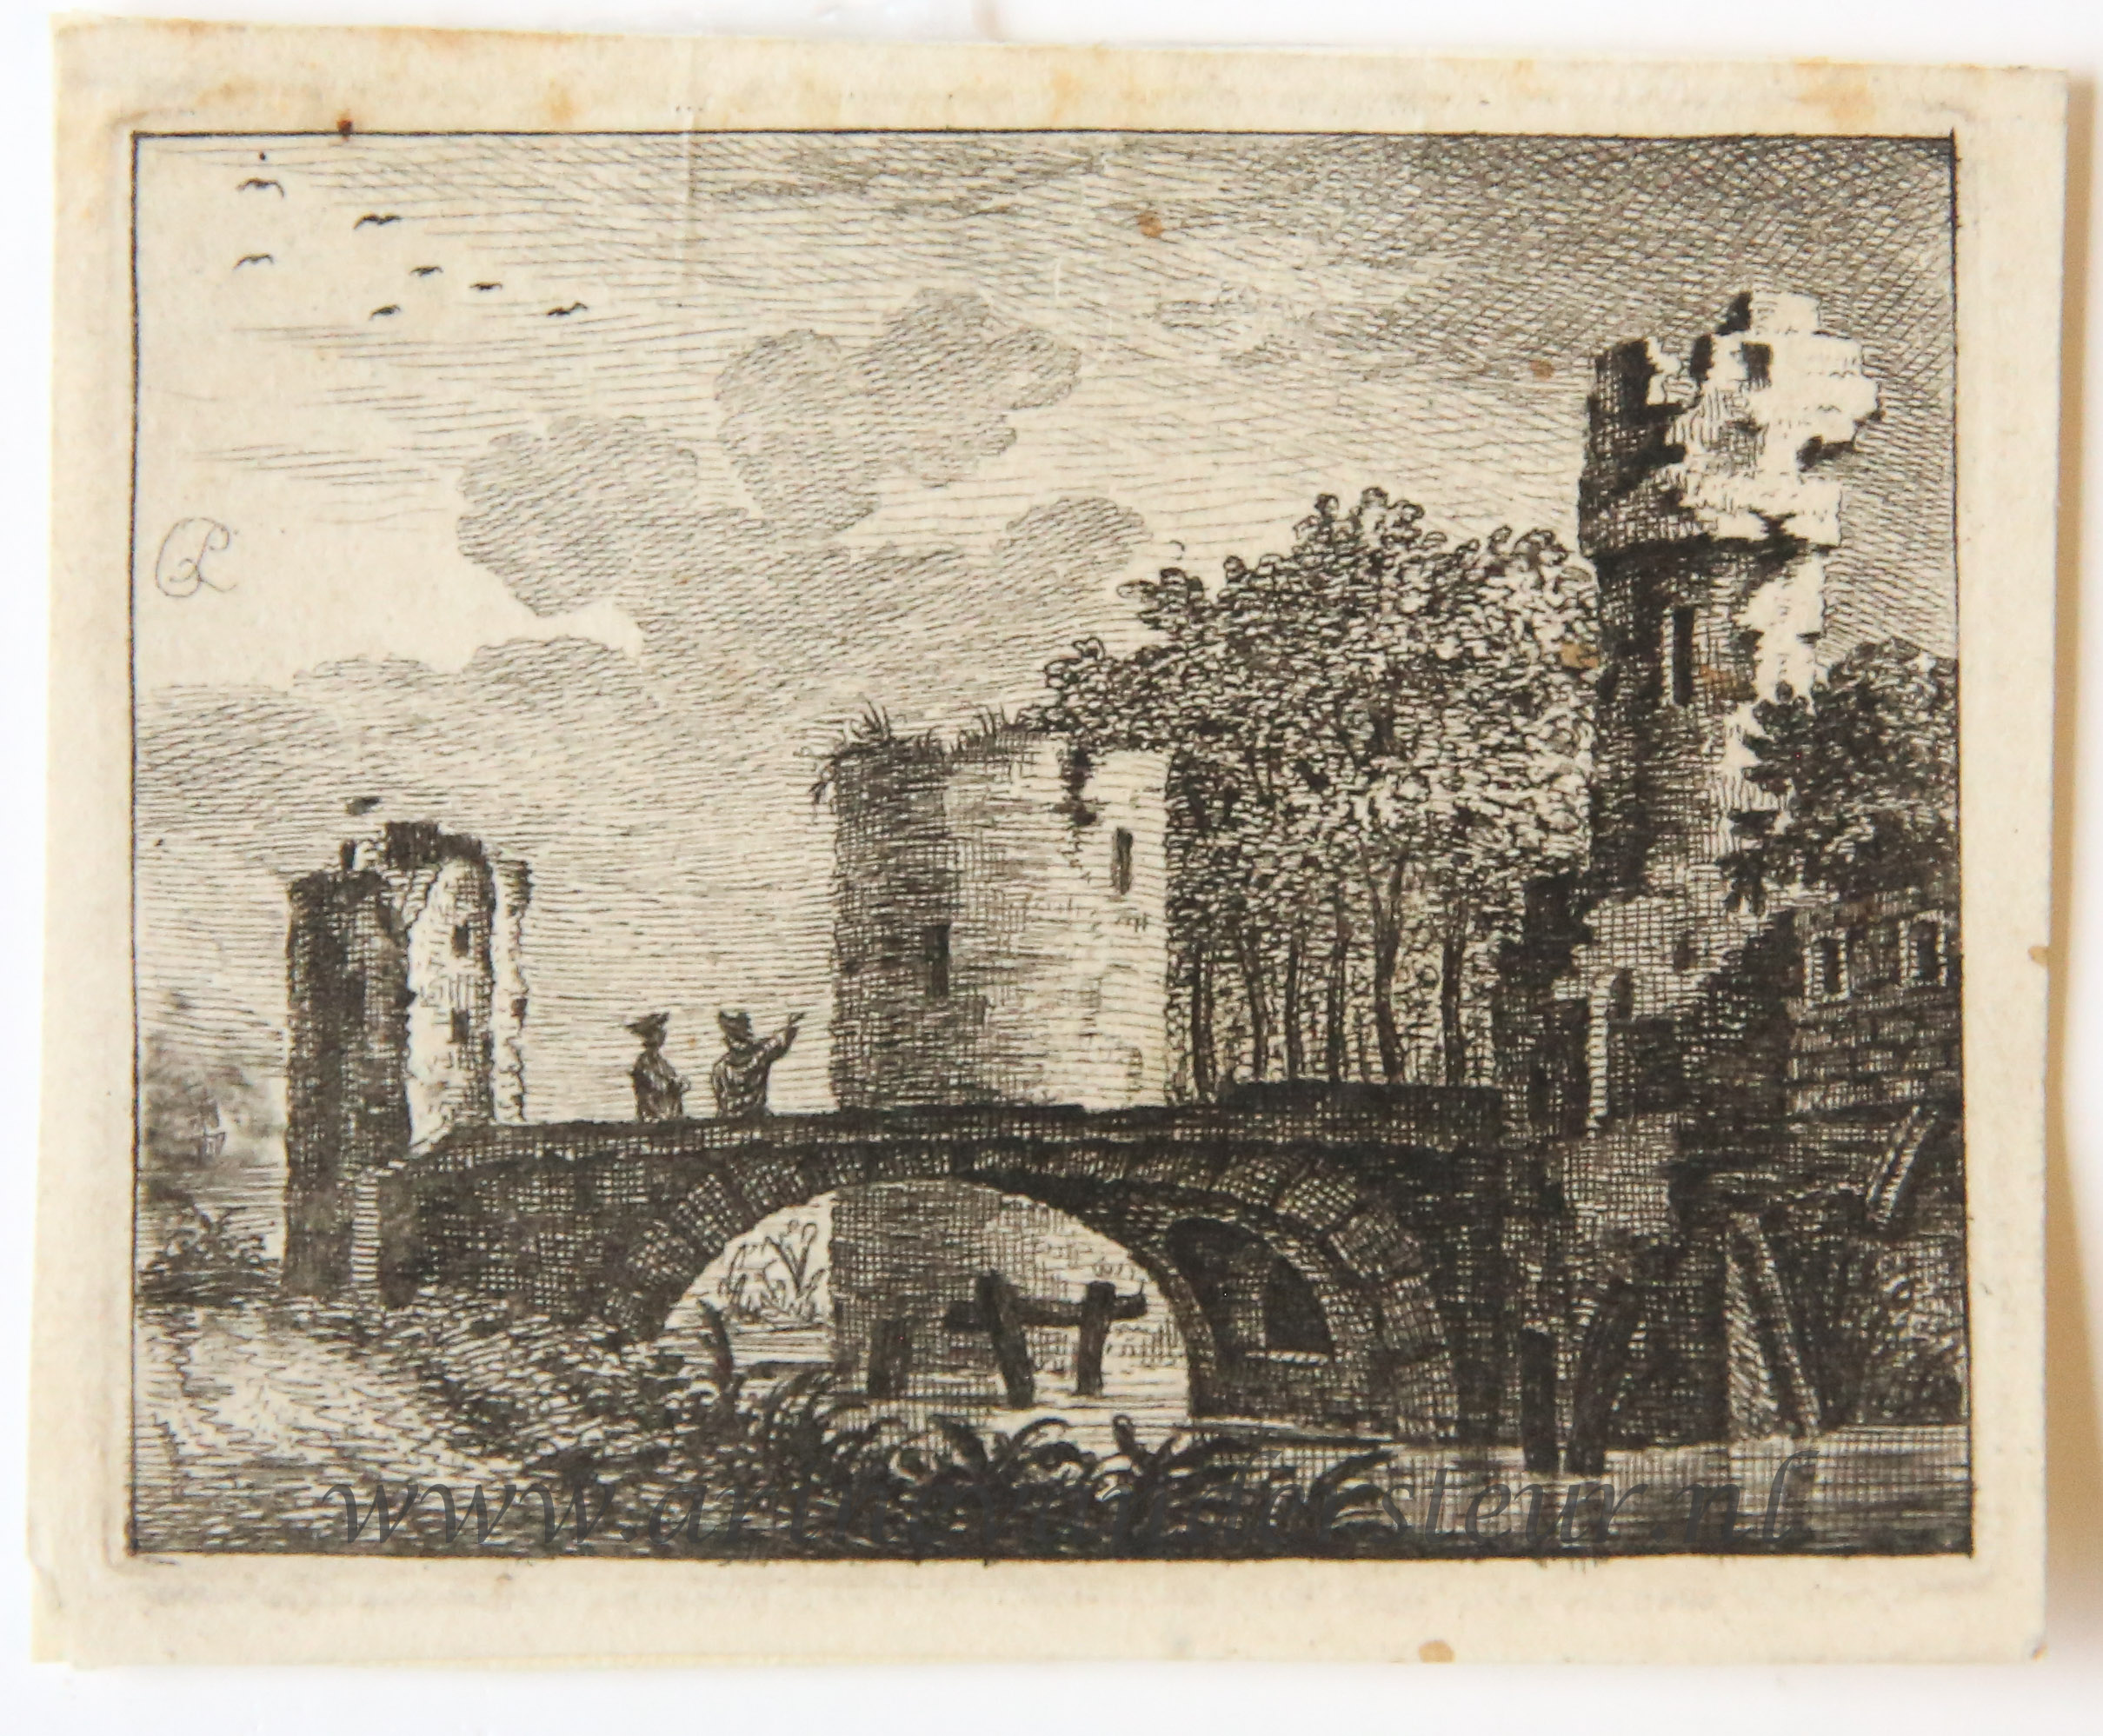 [Antique print, etching] Small view with ruins, published 1766.